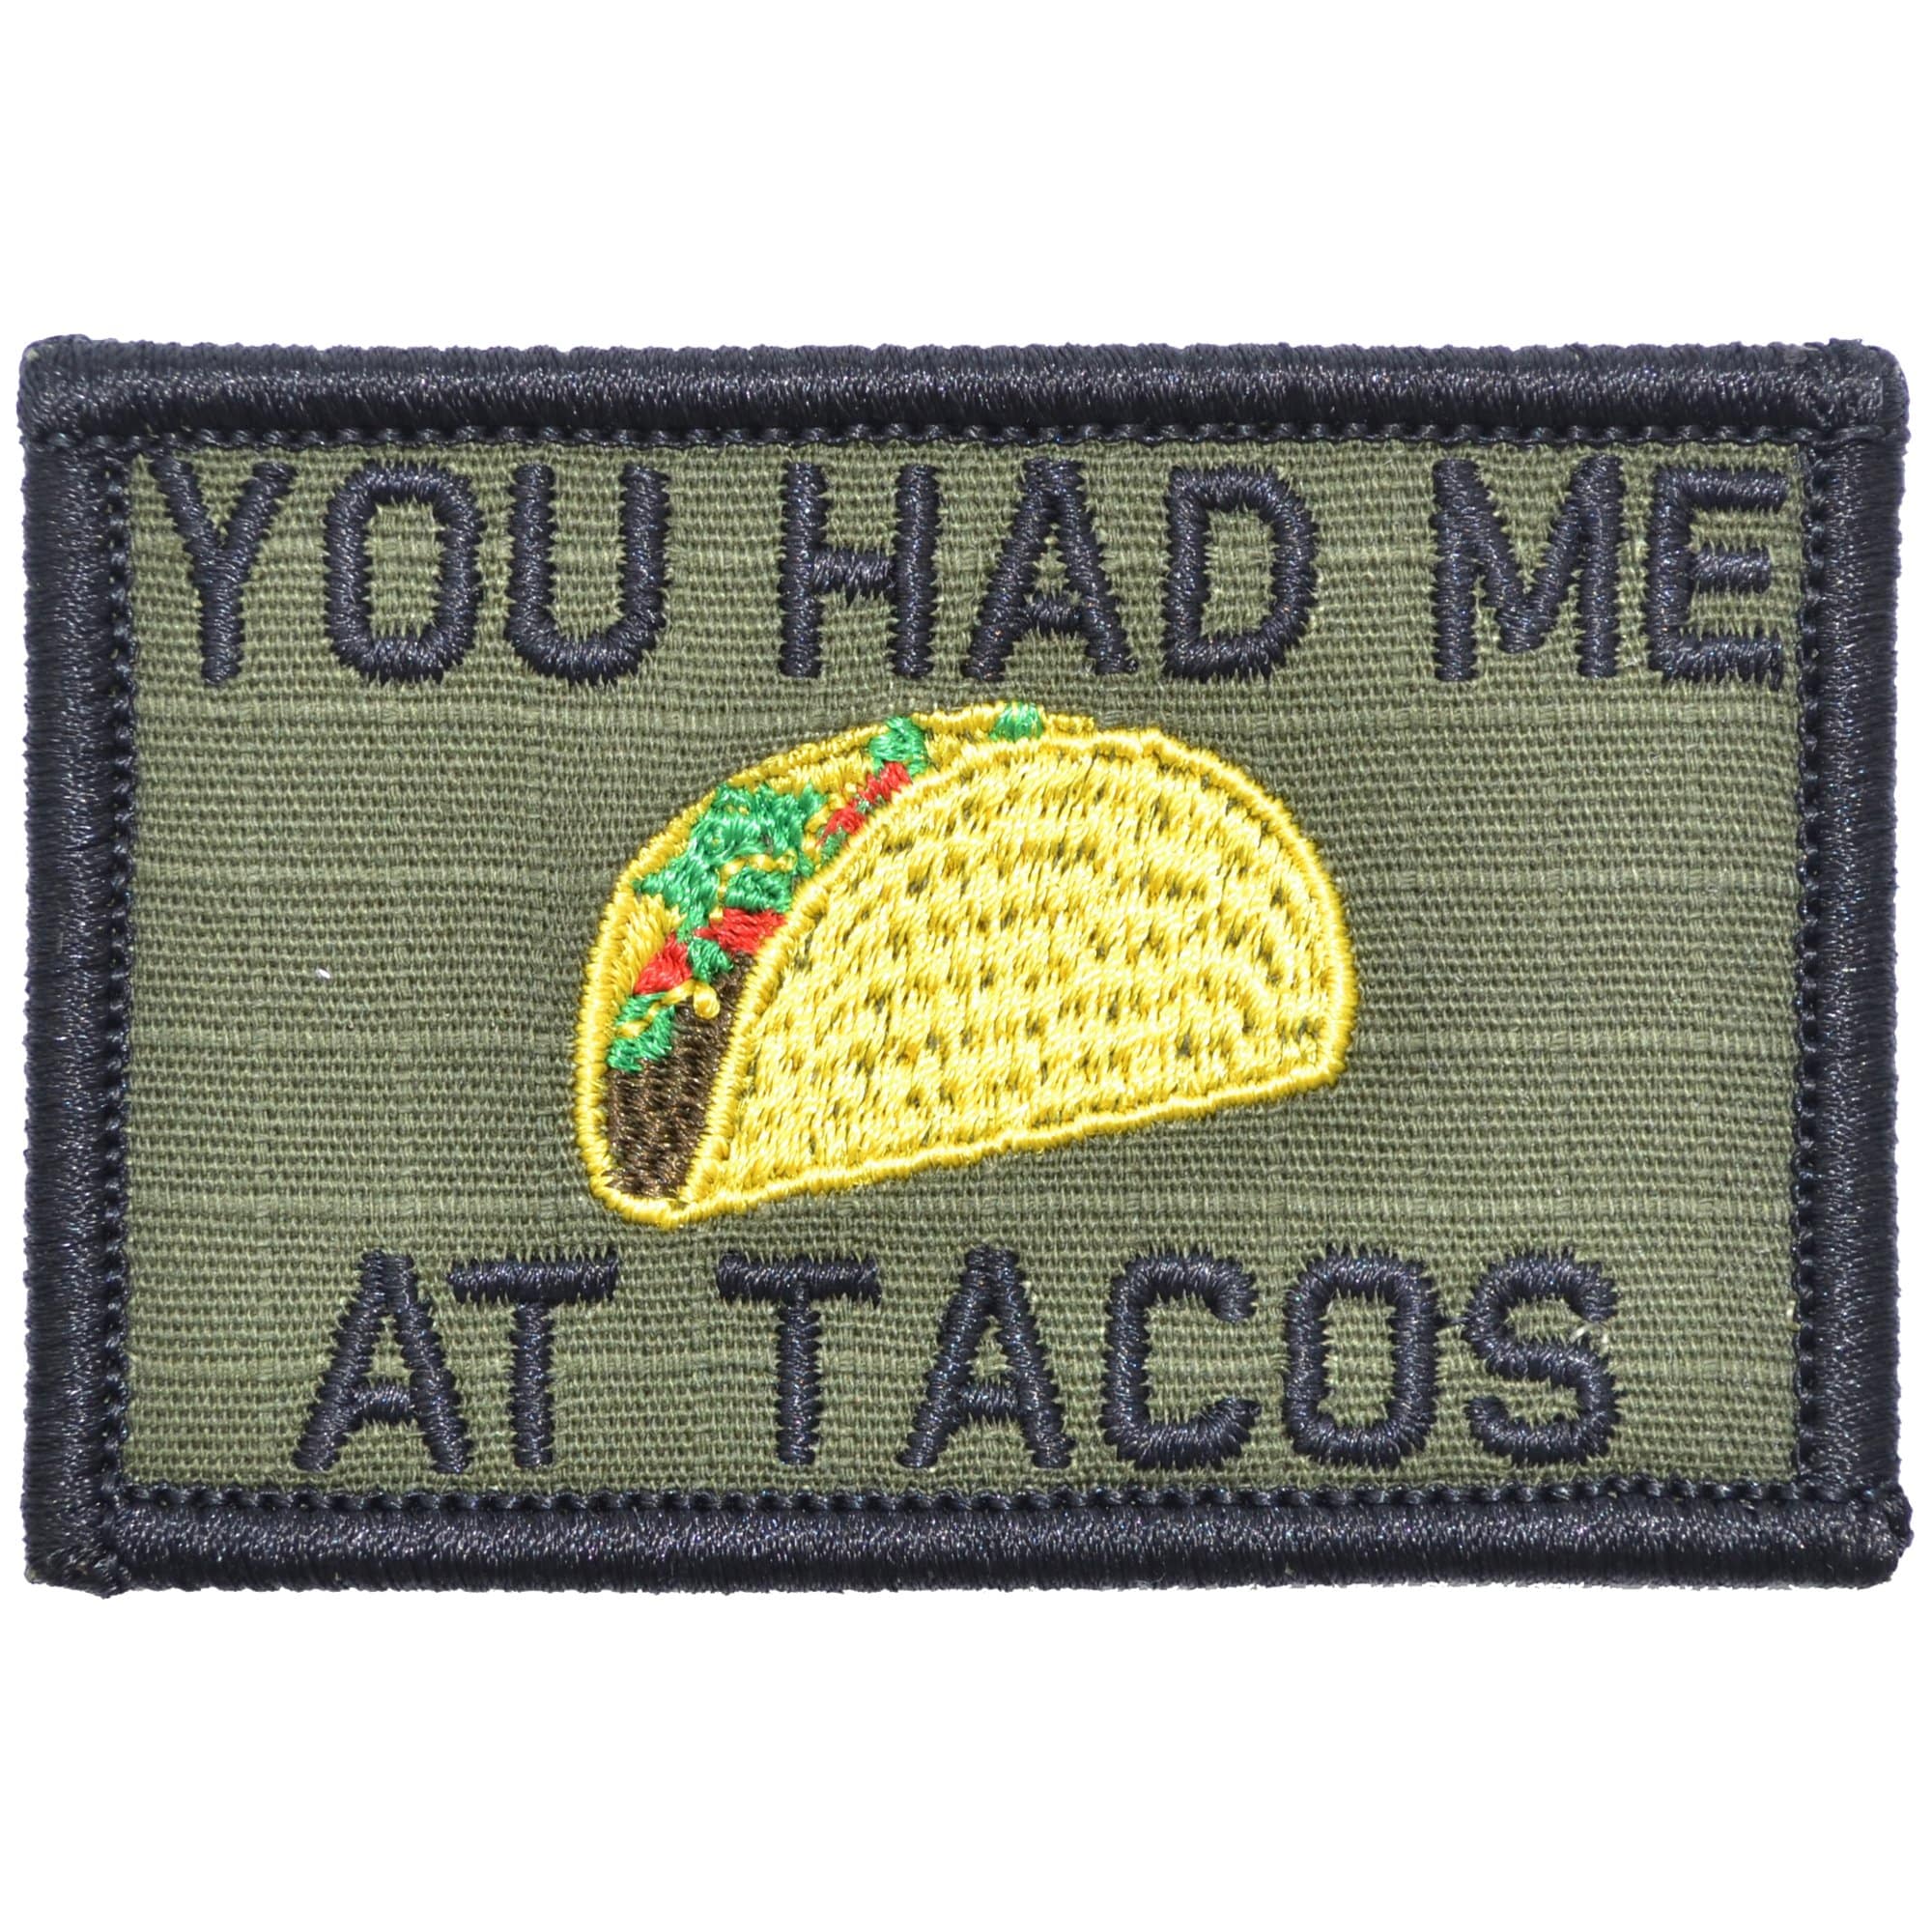 Tactical Gear Junkie Patches Olive Drab You Had Me At Tacos - 2x3 Patch